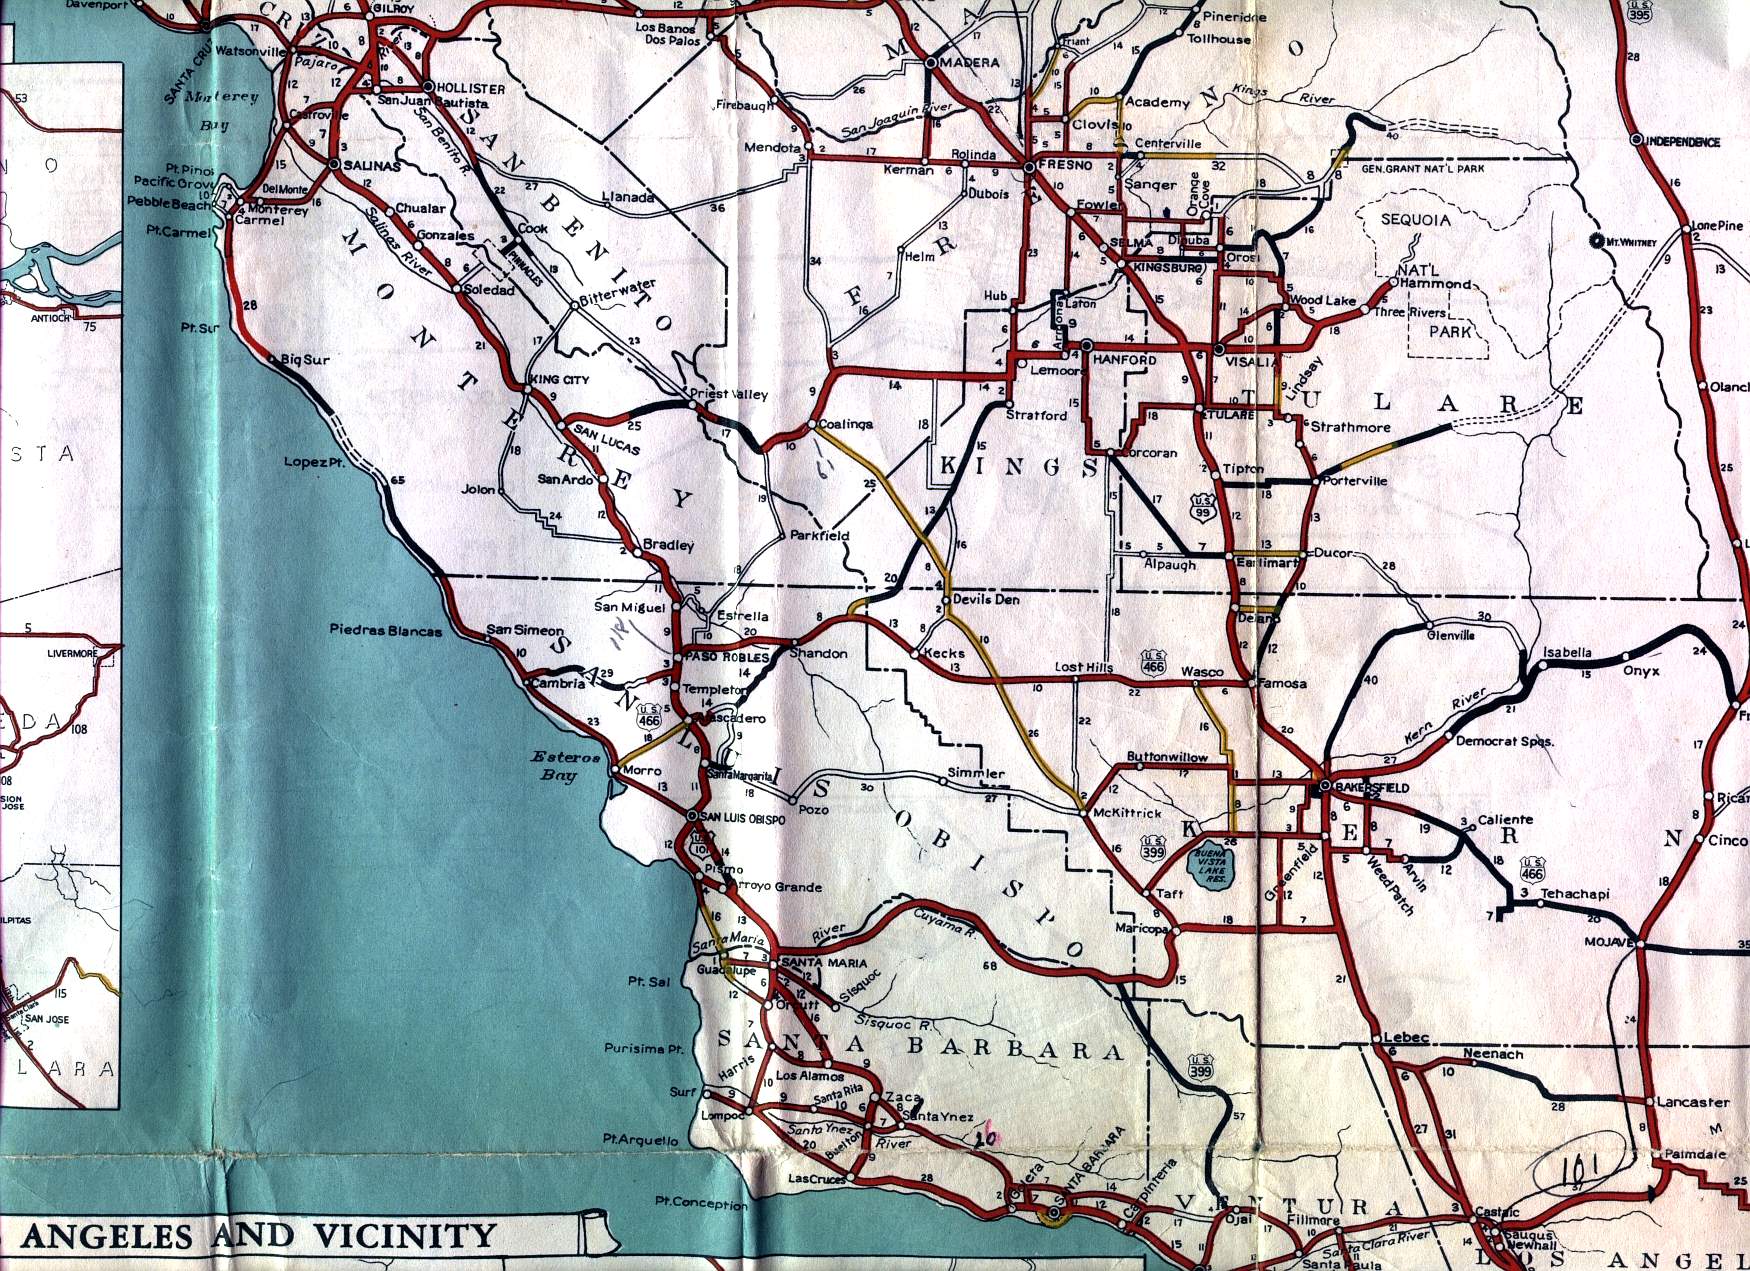 Central Coast, Central Valley, on 1936 California official highway map